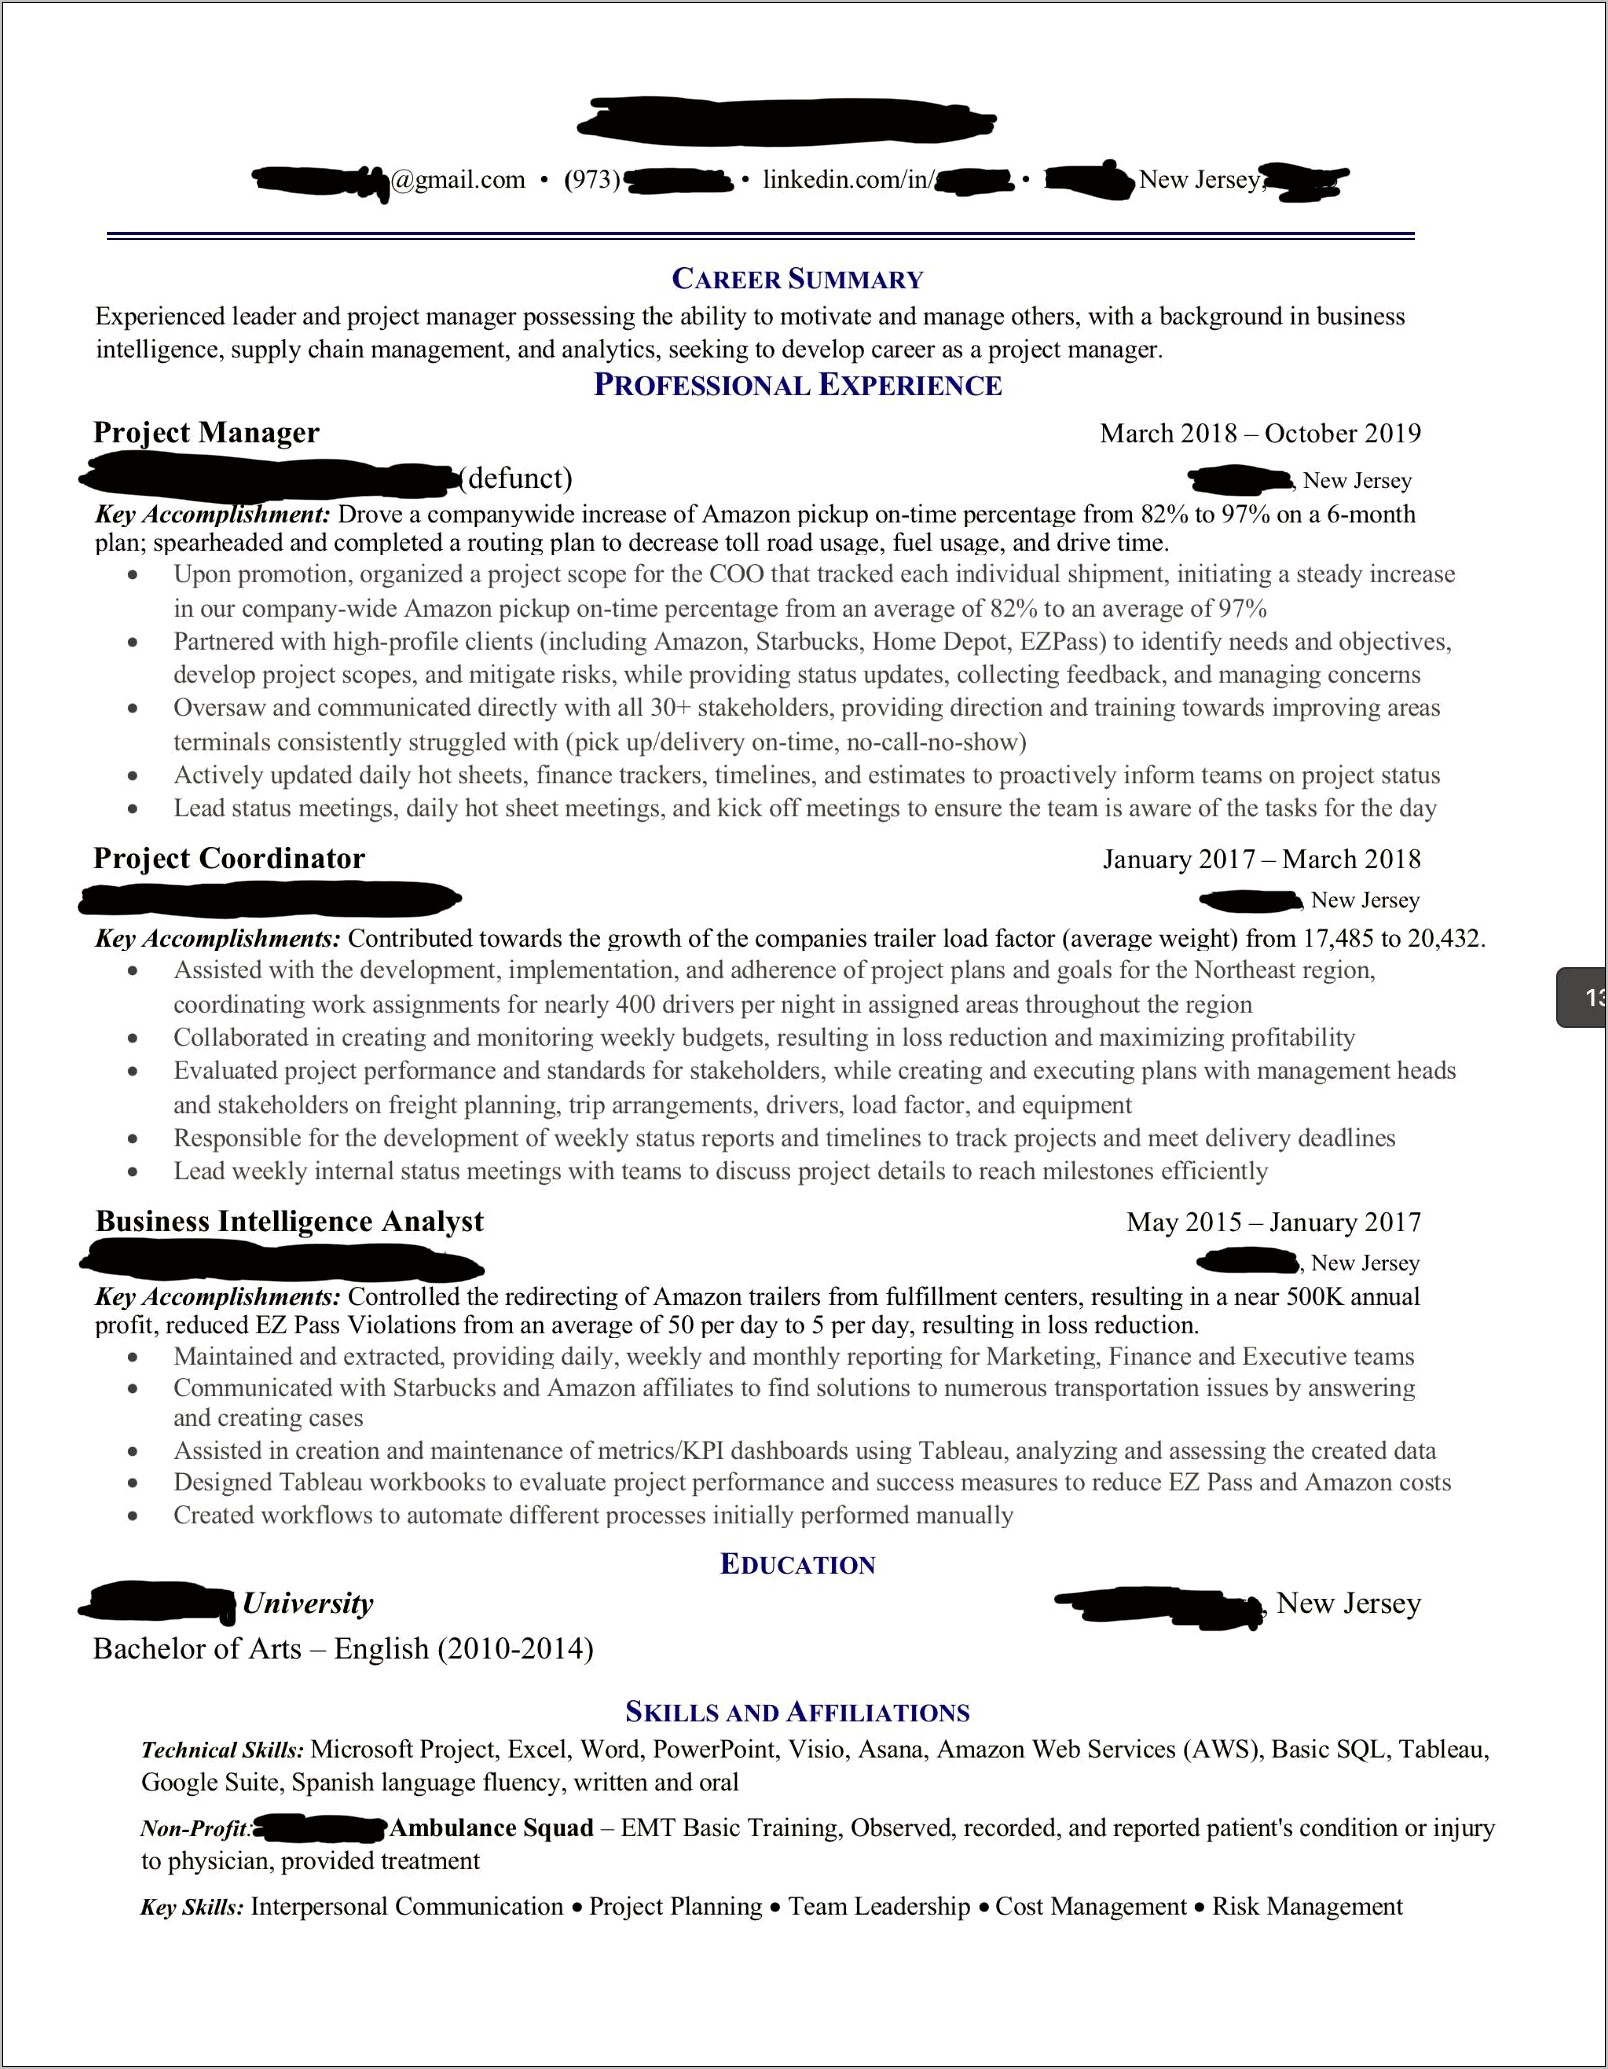 Does Emt Training Look Good On A Resume